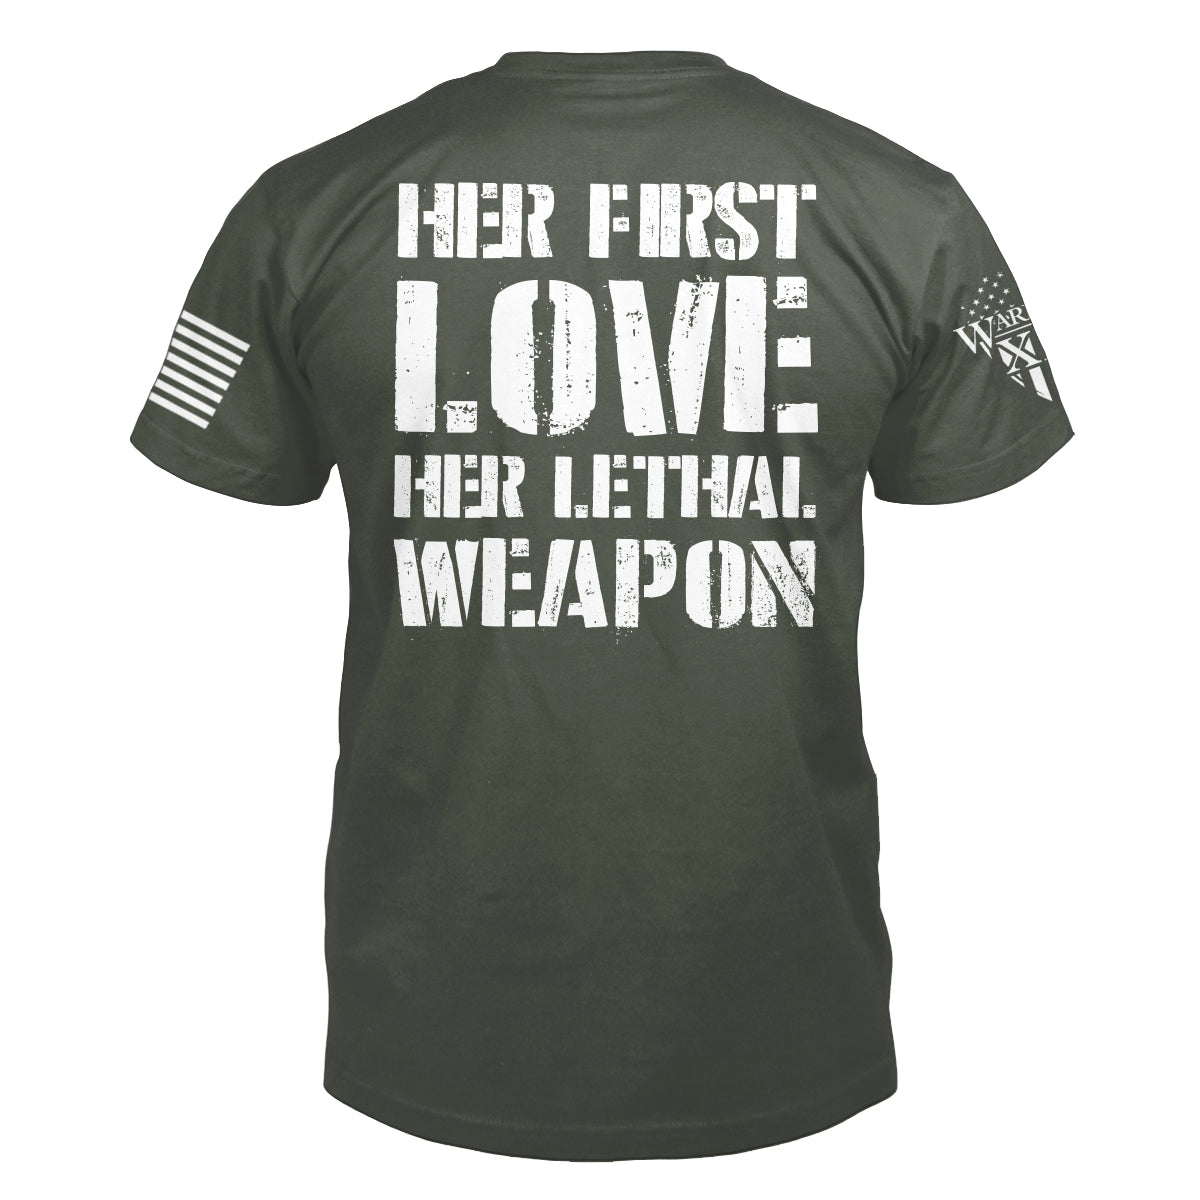 The back of "Her Love, Her Weapon" featuring the main design of, Her Love, Her Weapon.